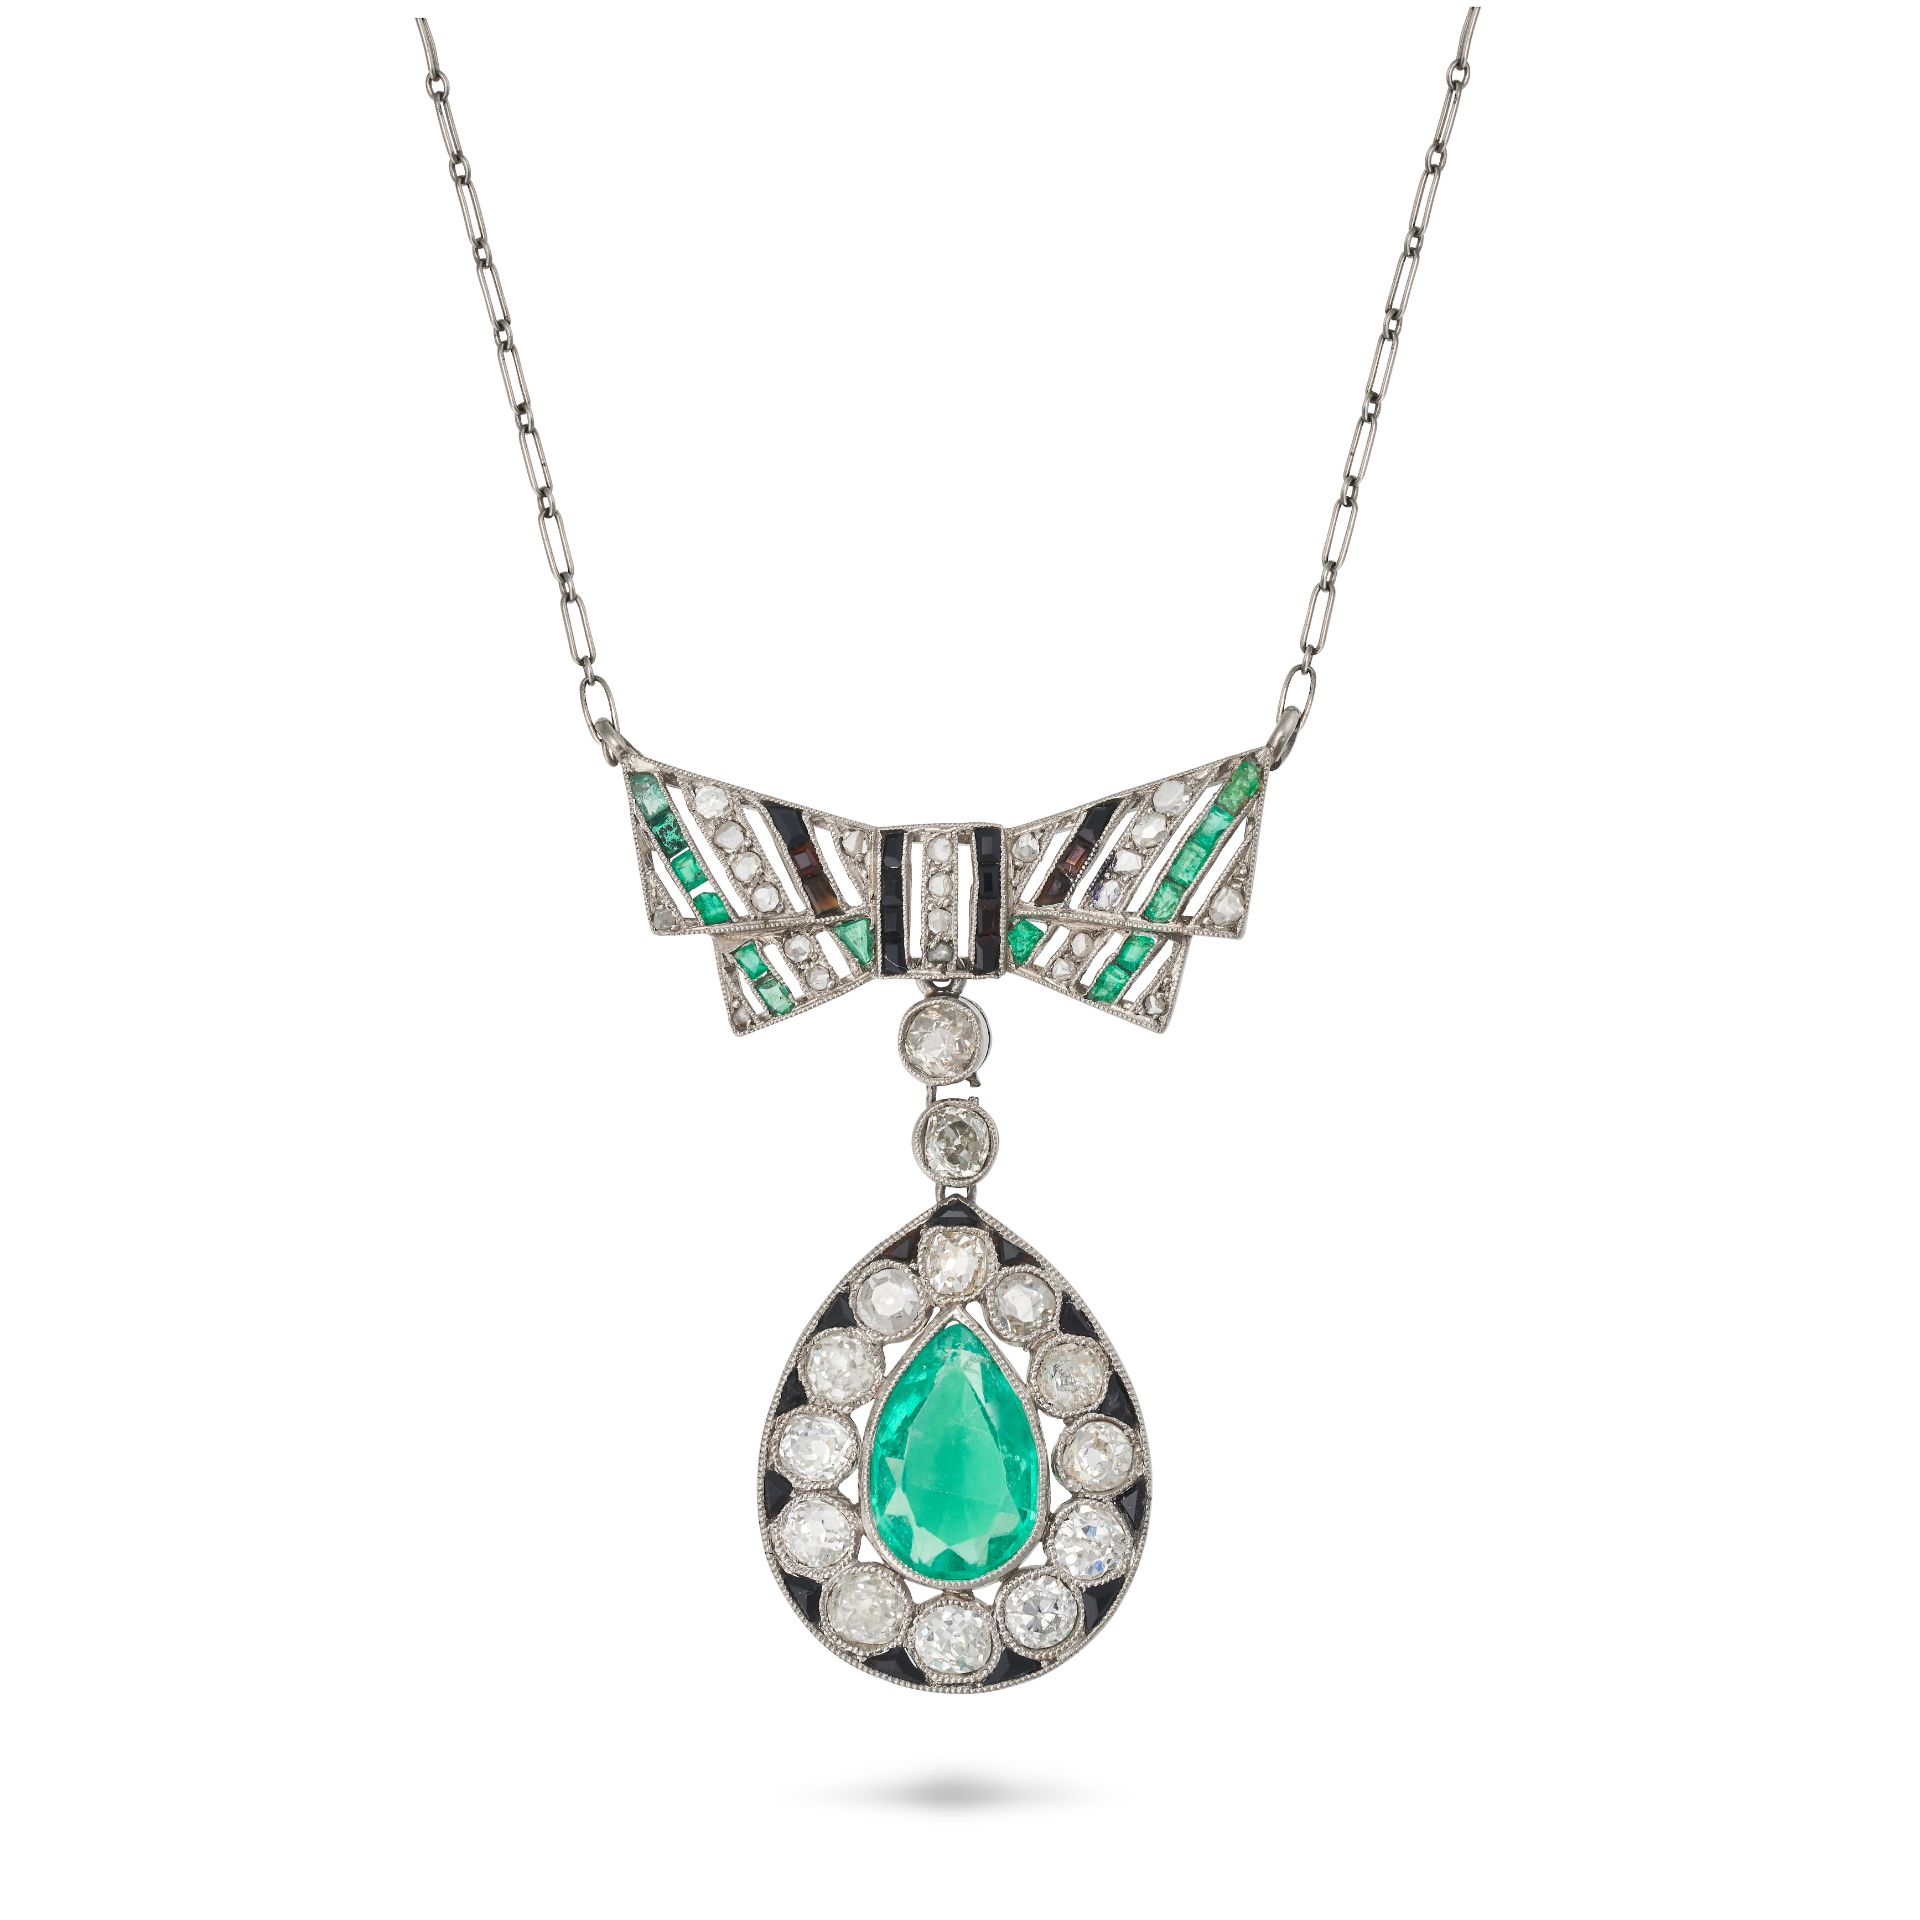 A FRENCH EMERALD, DIAMOND AND ONYX PENDANT NECKLACE in platinum, the pendant designed as a bow se...